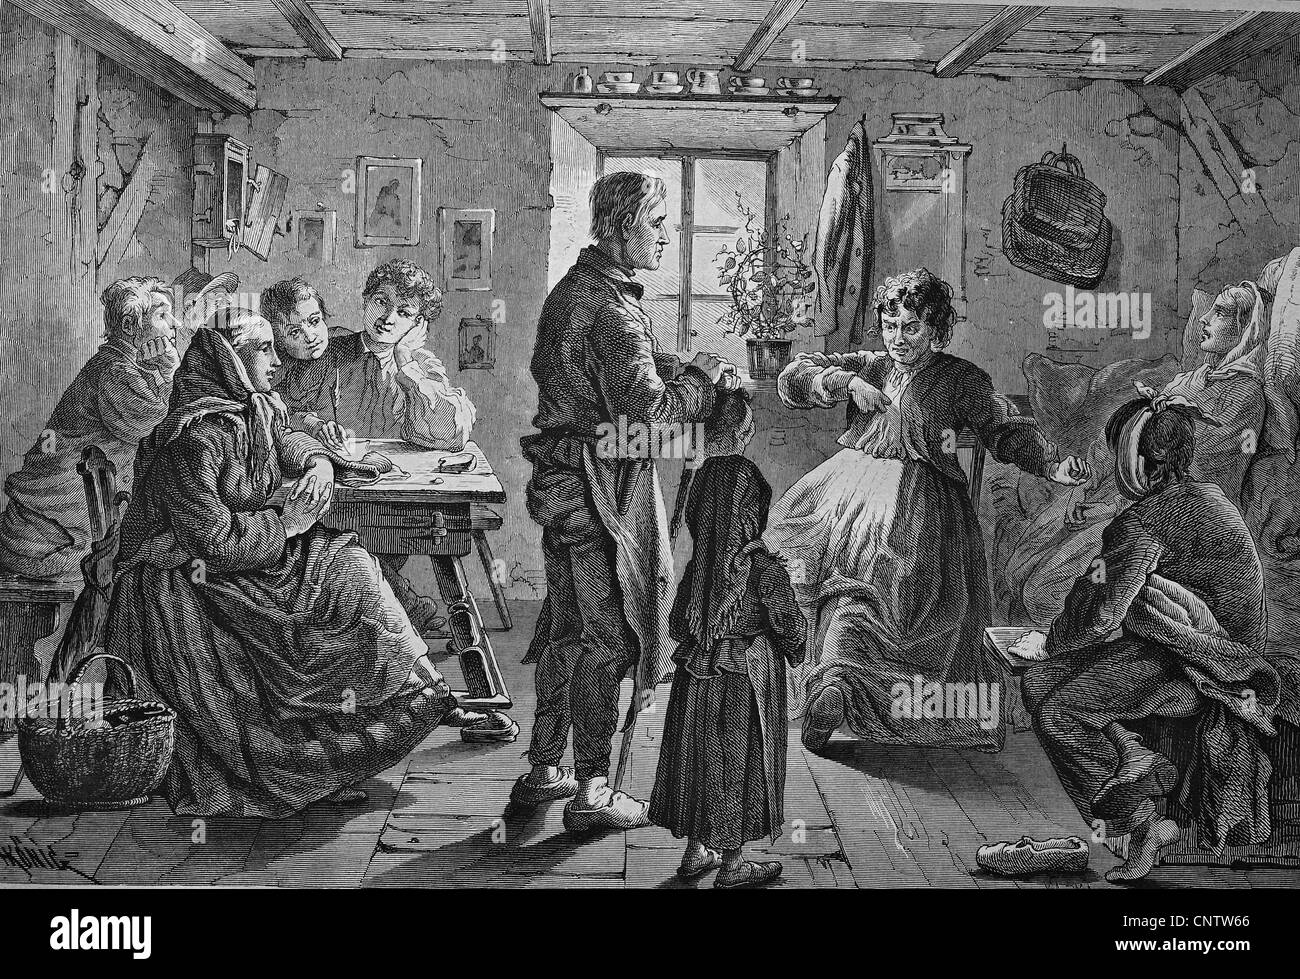 At Dorfsibylle's home, historical engraving, 1869 Stock Photo